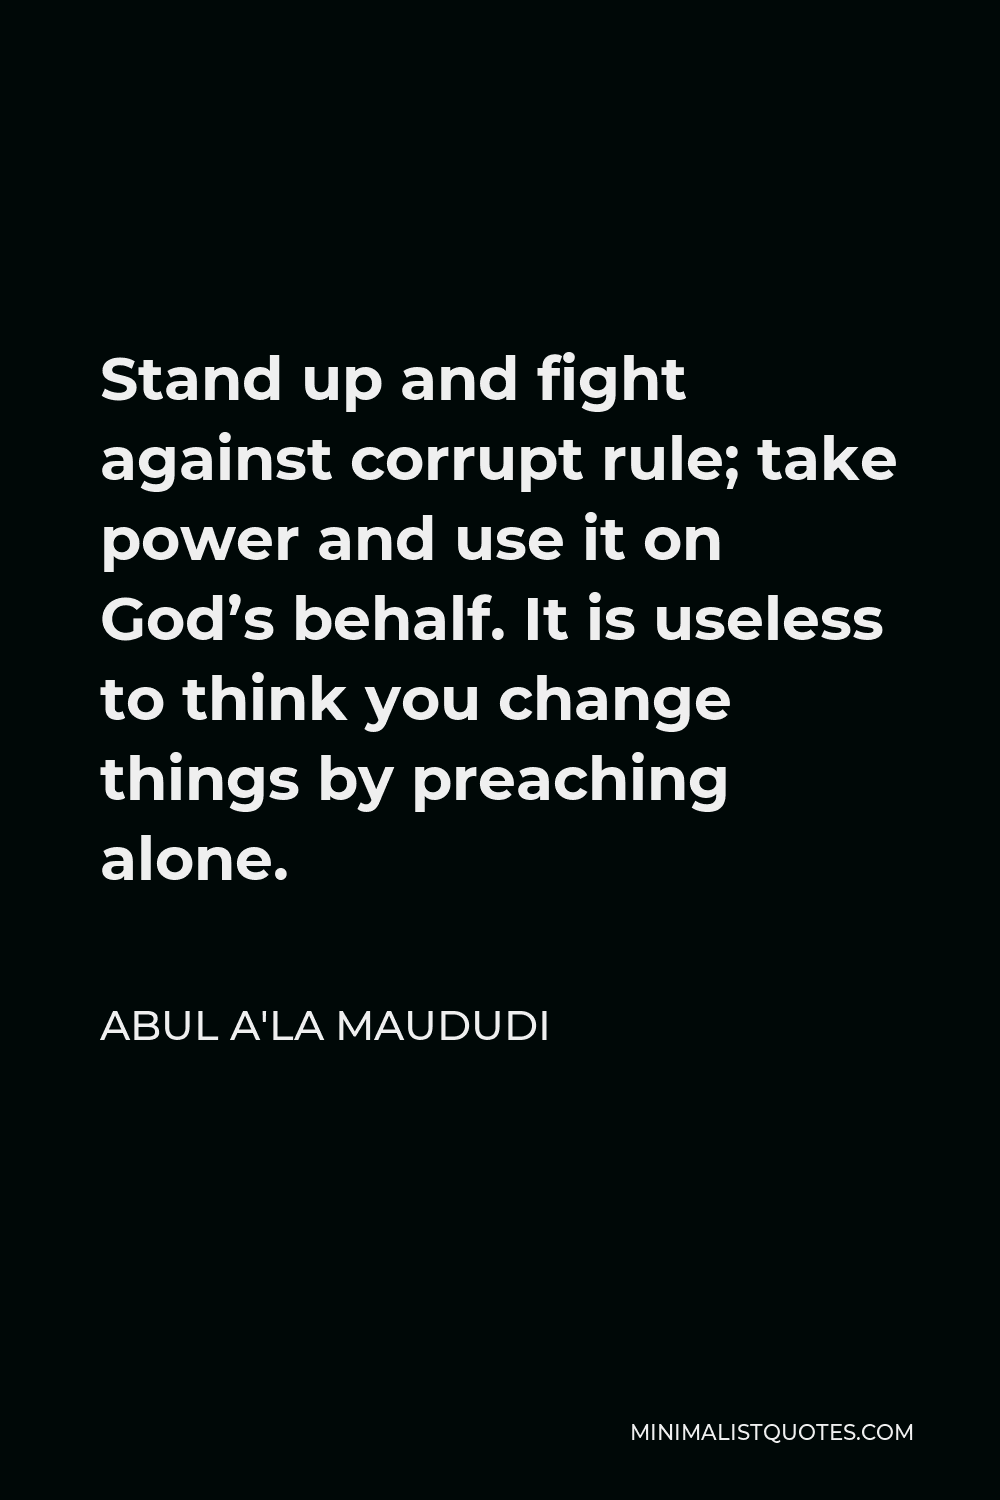 Abul A'la Maududi Quote - Stand up and fight against corrupt rule; take power and use it on God’s behalf. It is useless to think you change things by preaching alone.